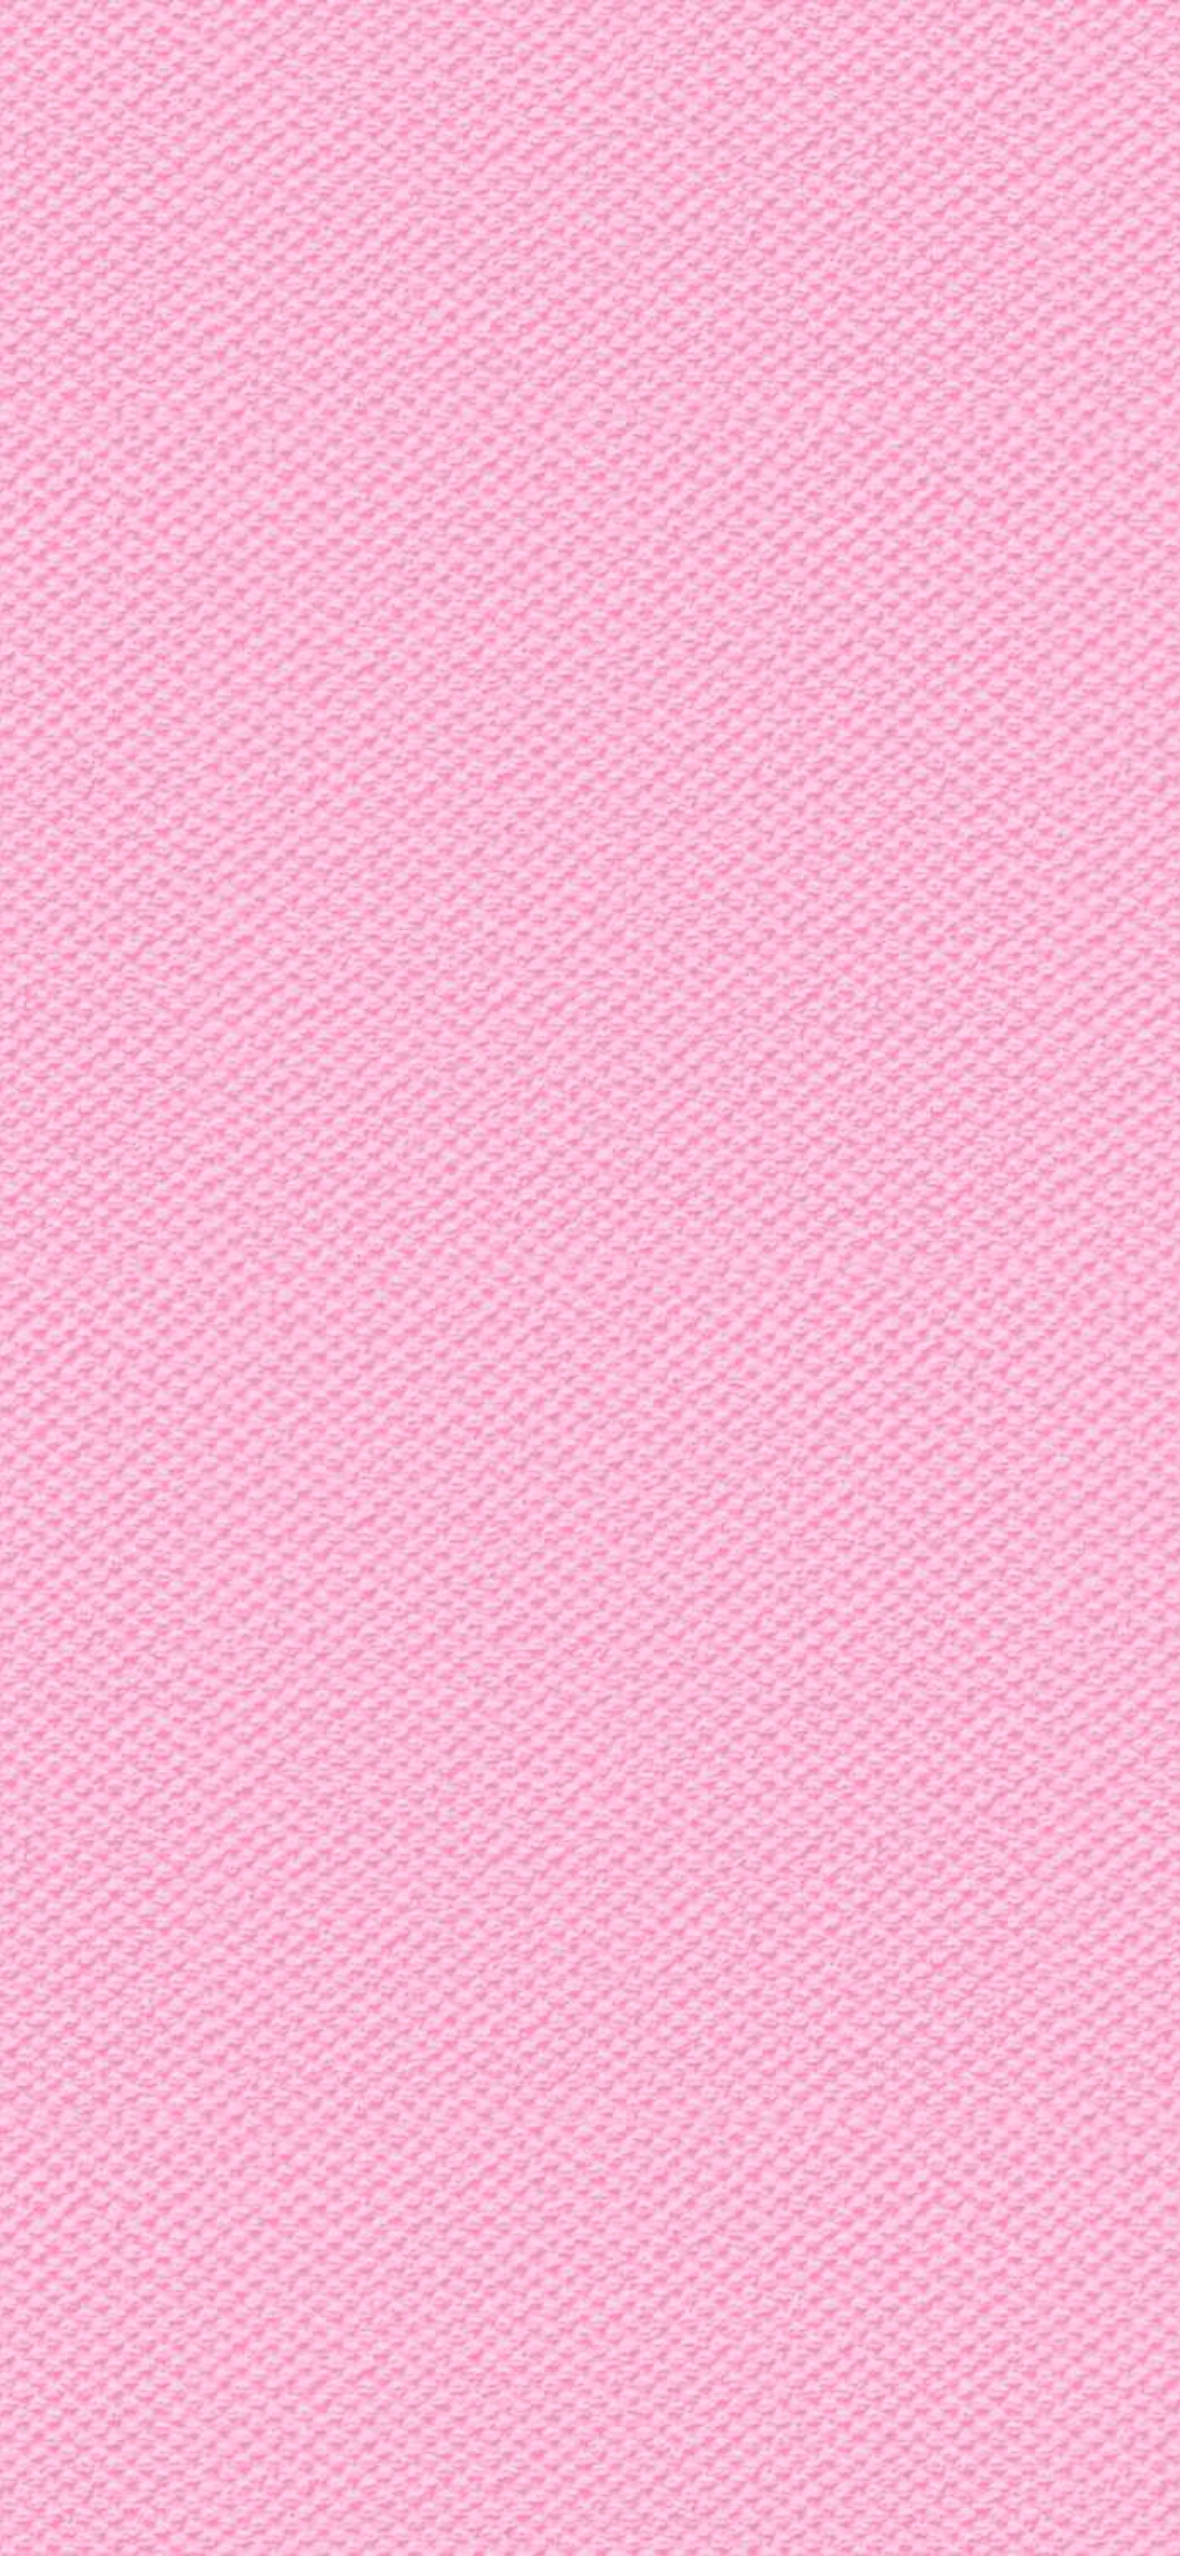 Solid Pink Wallpaper For iPhone